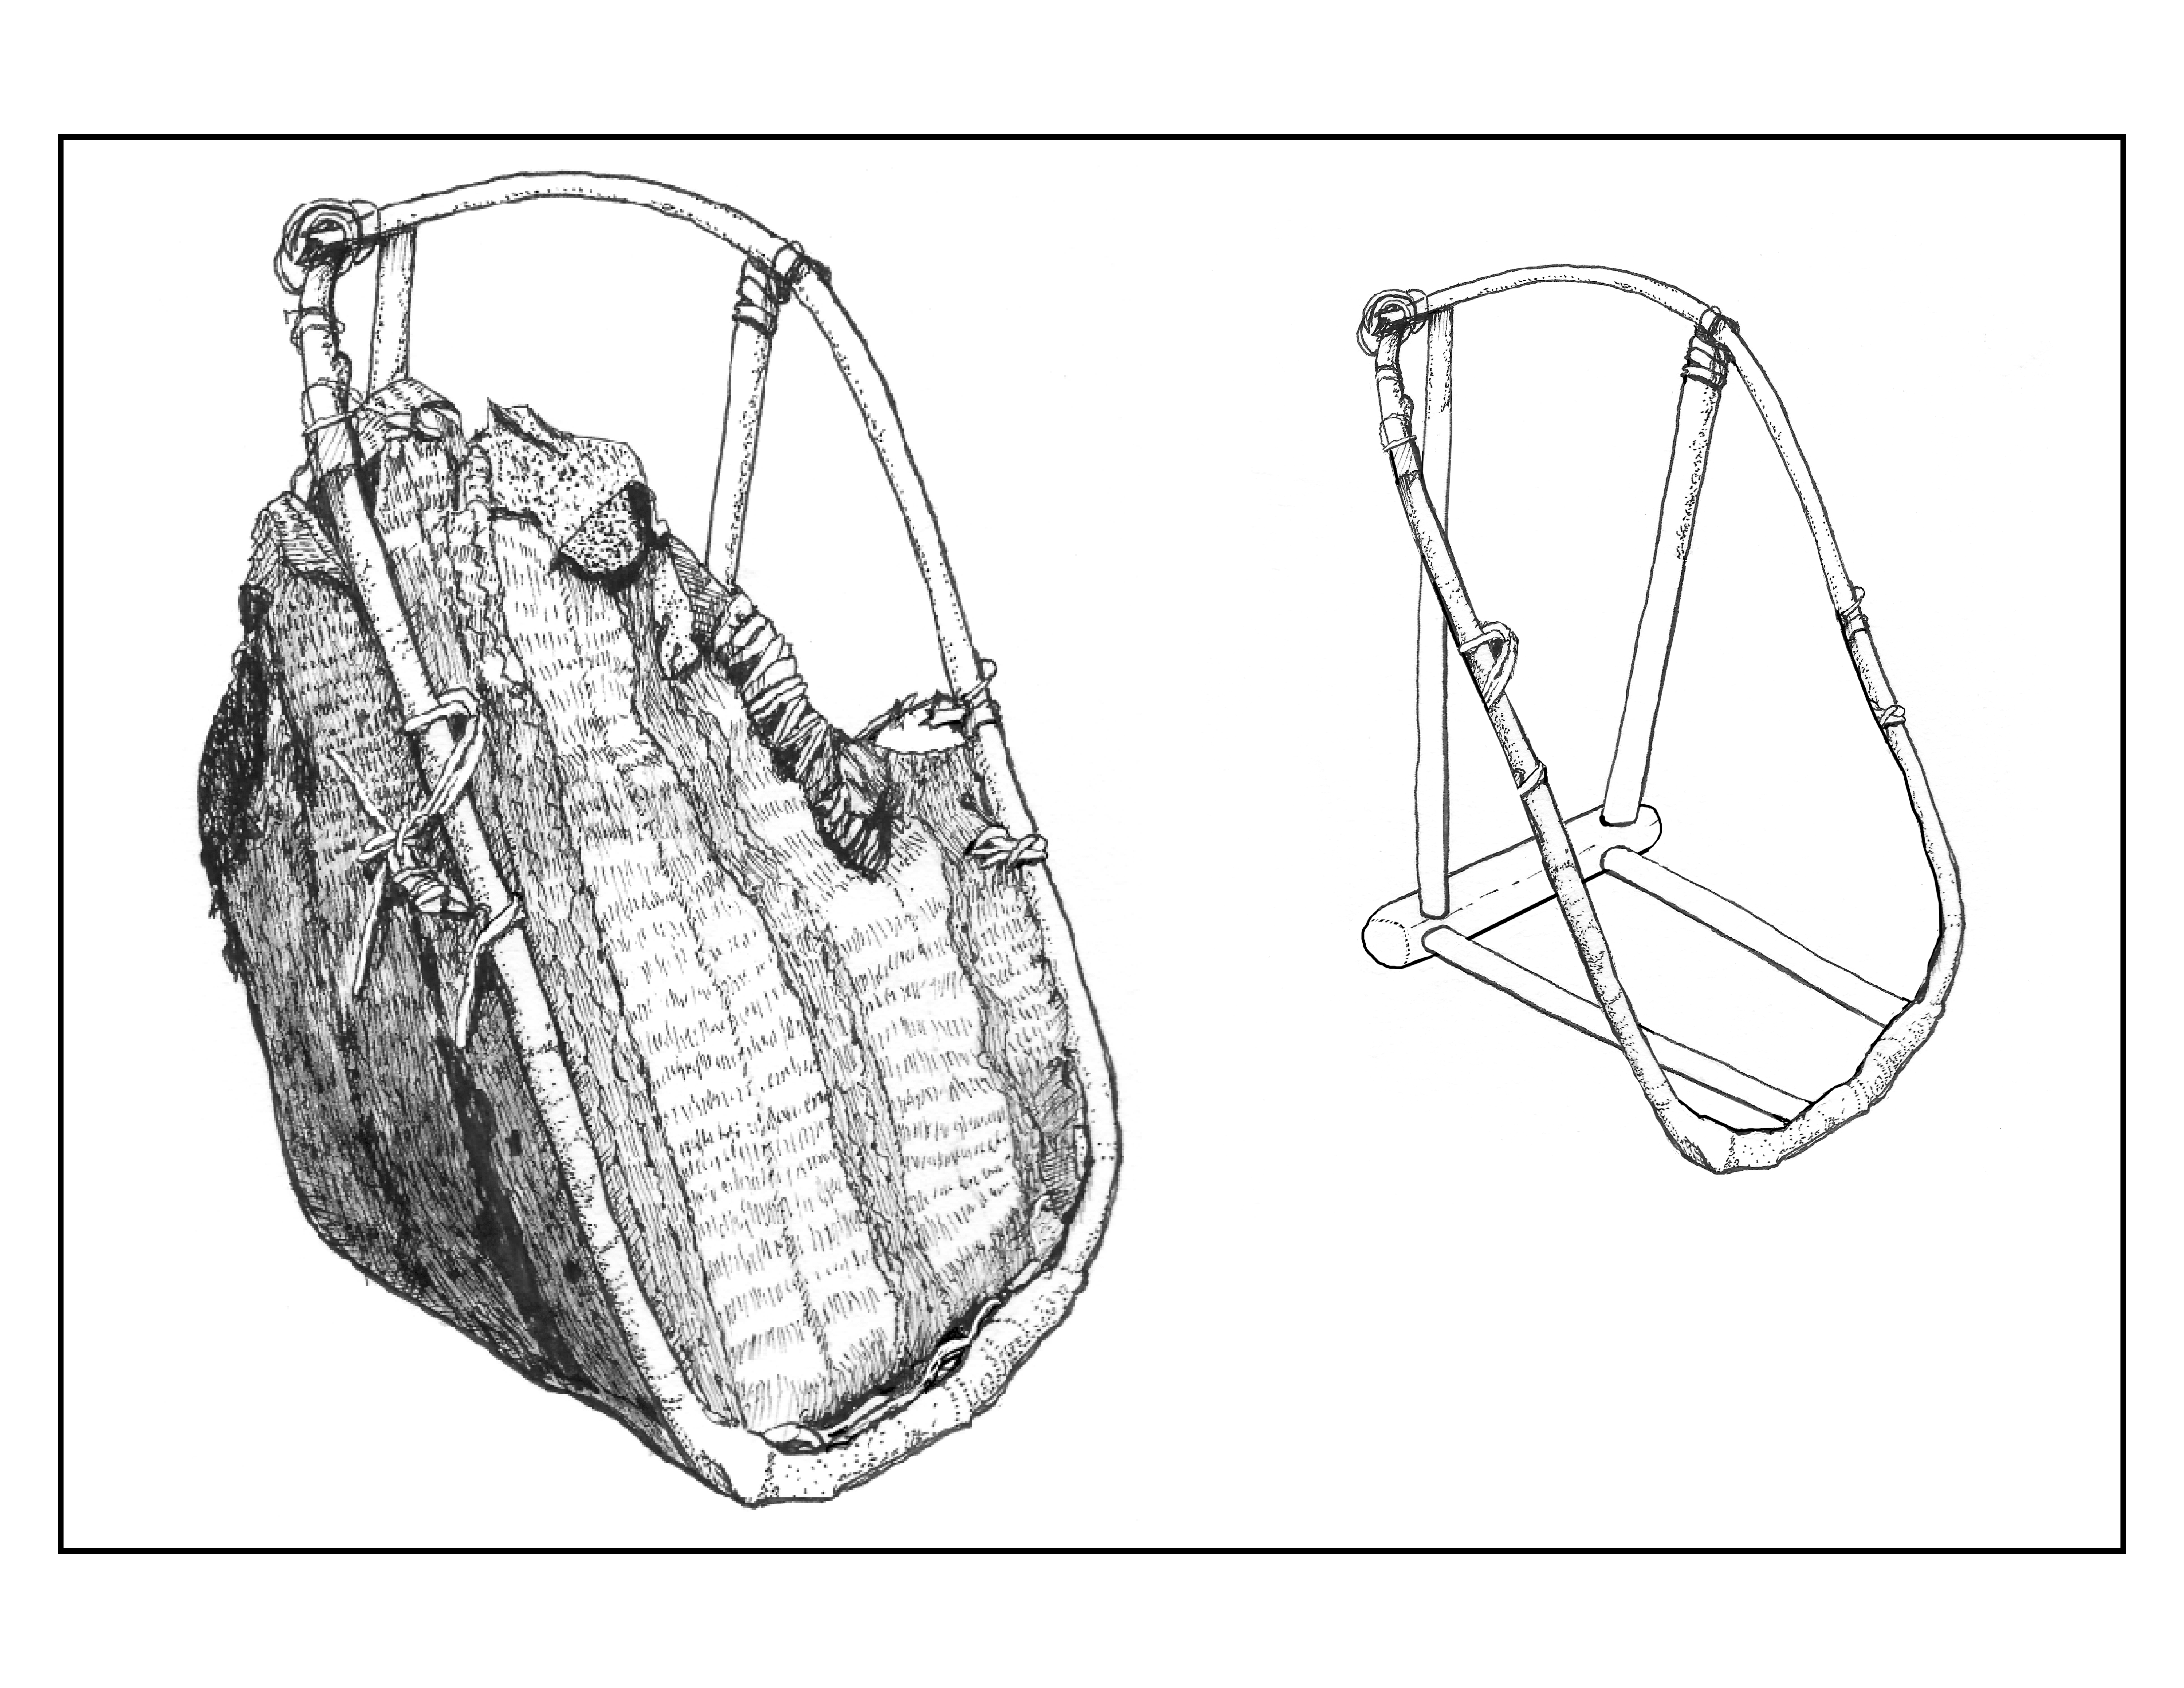 This illustration depicts the cradle with woven rye grass but also its internal frame